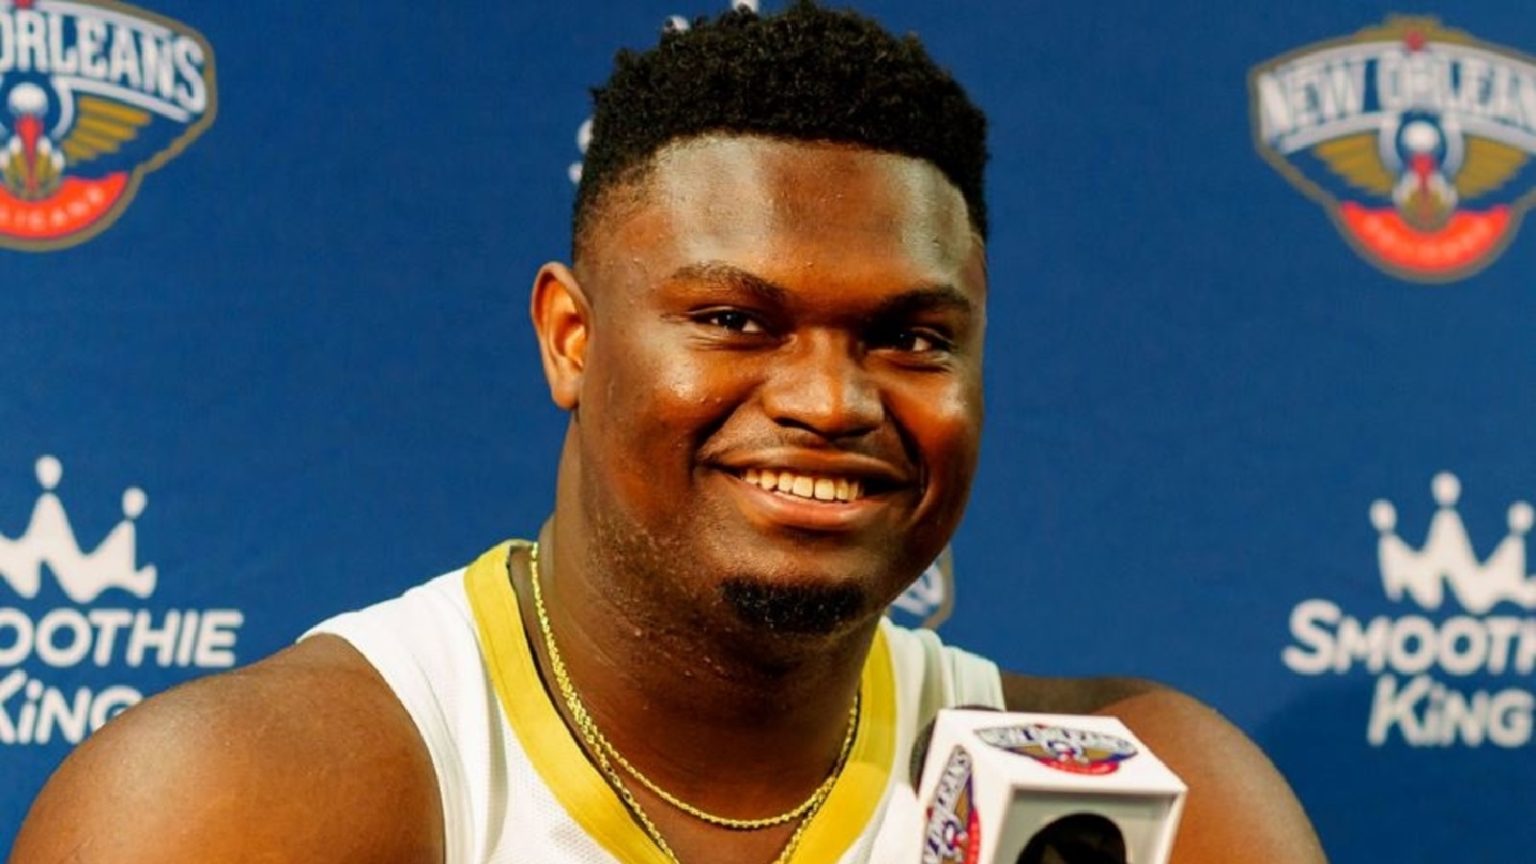 Breaking News: Zion Williamson Drops Bombshell Revelation on Brawl-Inducing Play